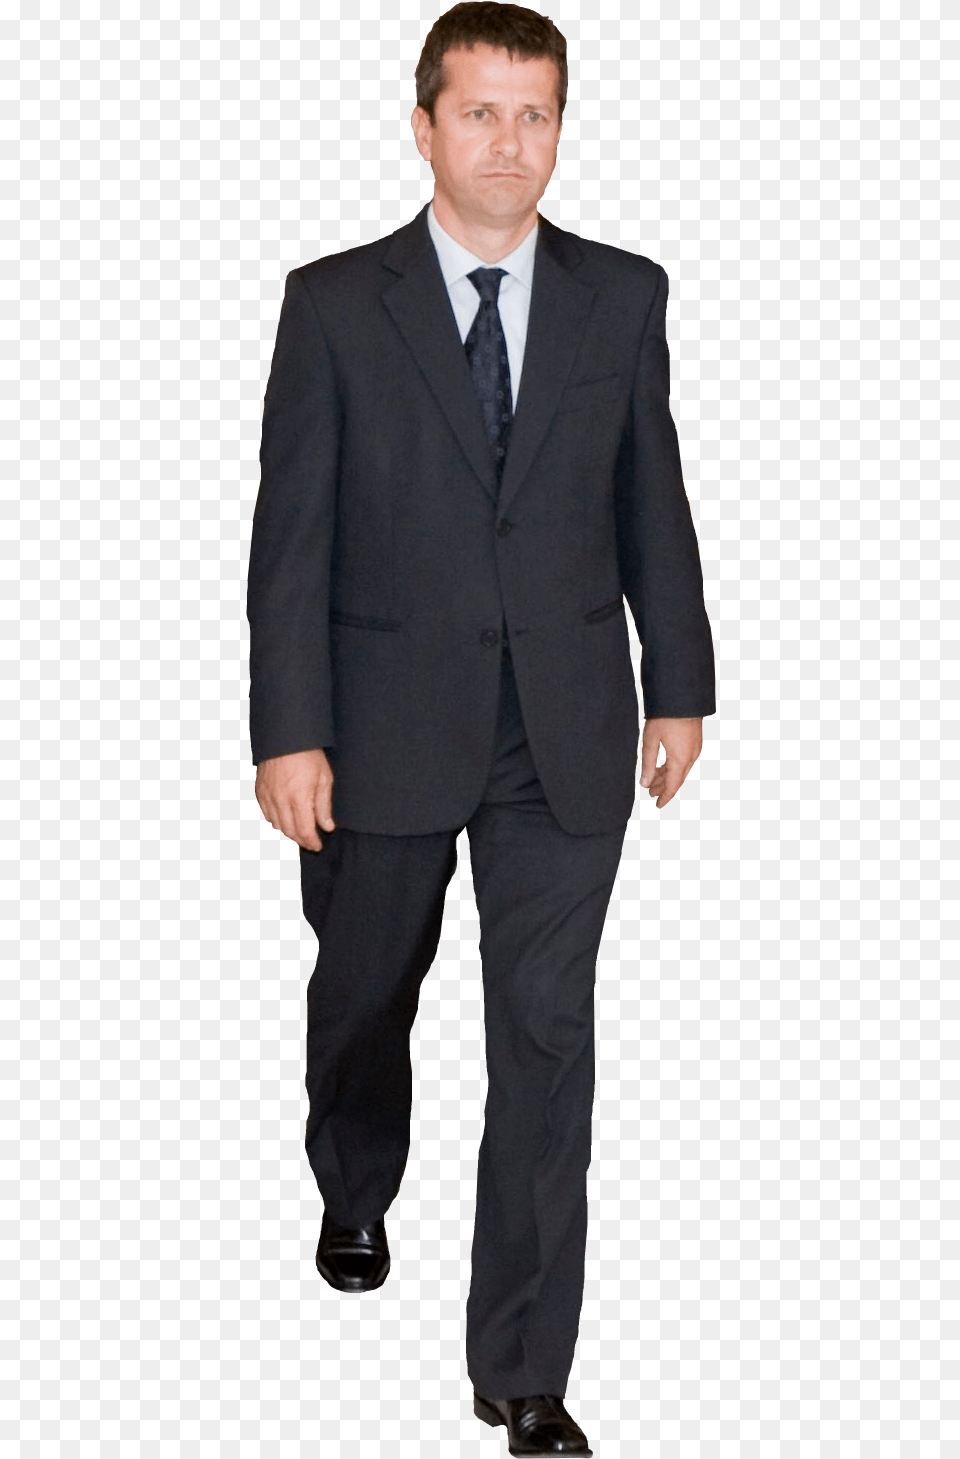 Man In Suit No Background, Accessories, Tie, Tuxedo, Formal Wear Free Png